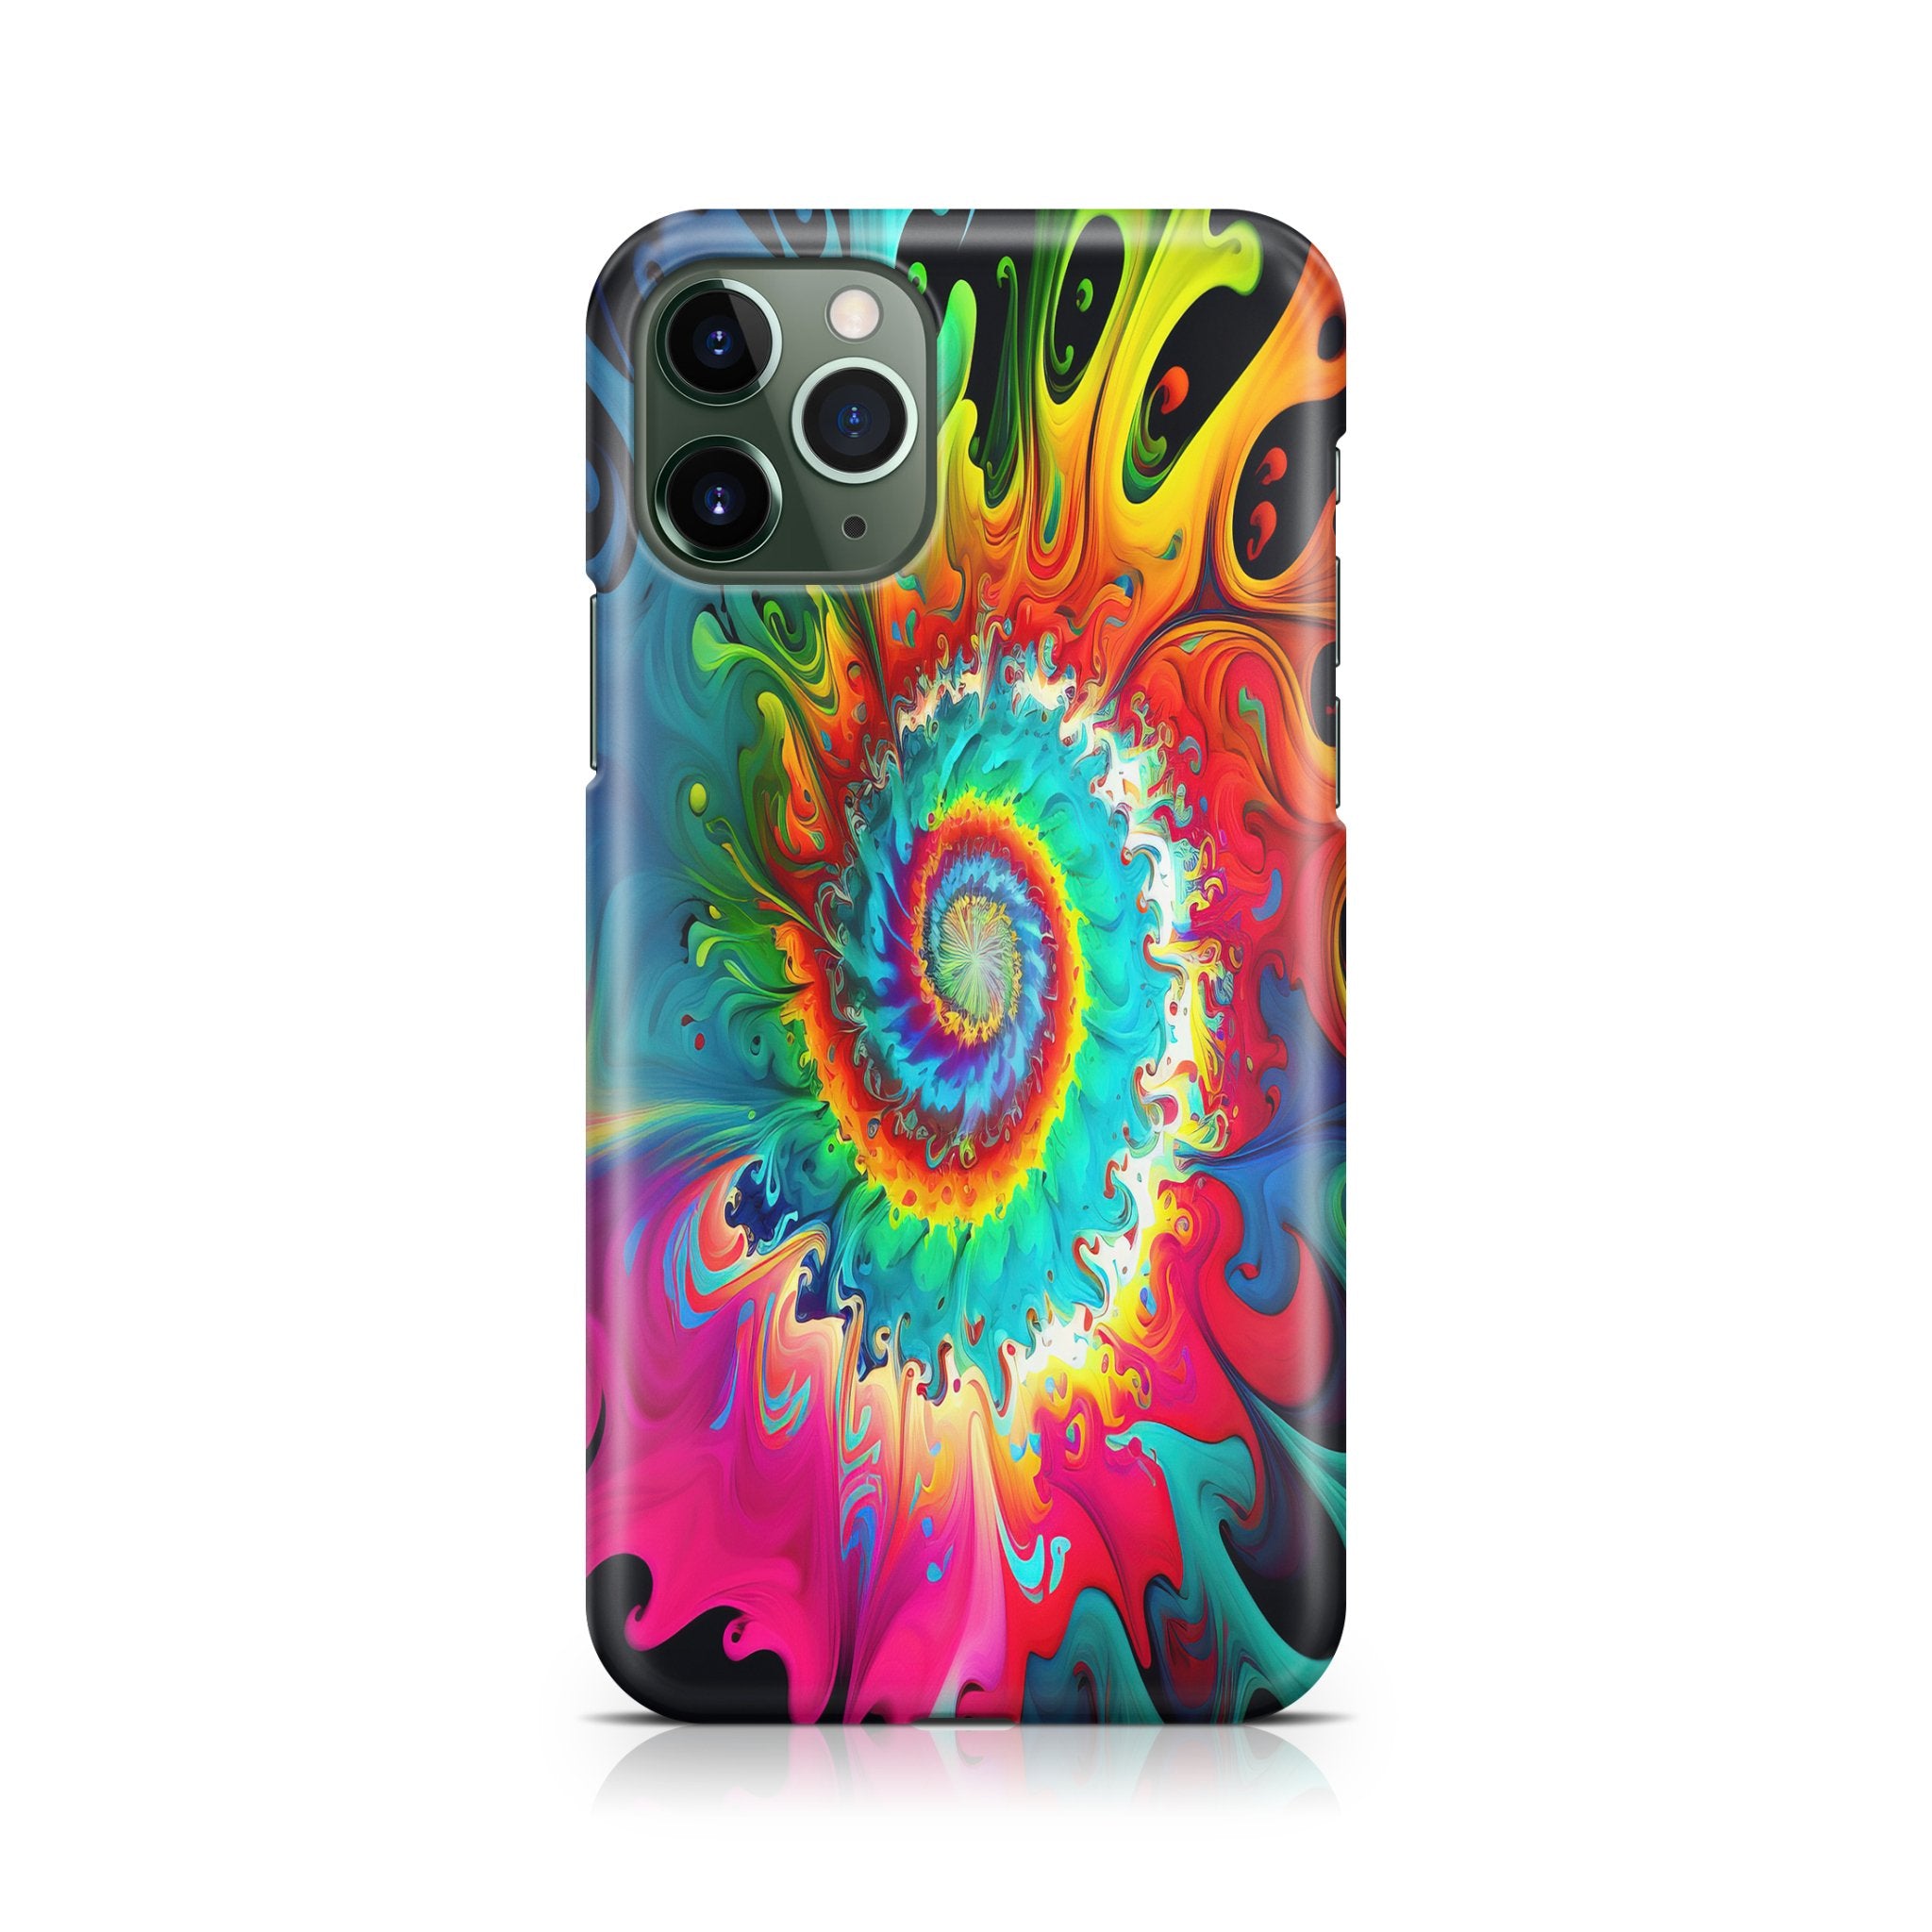 Twist of Fate - iPhone phone case designs by CaseSwagger